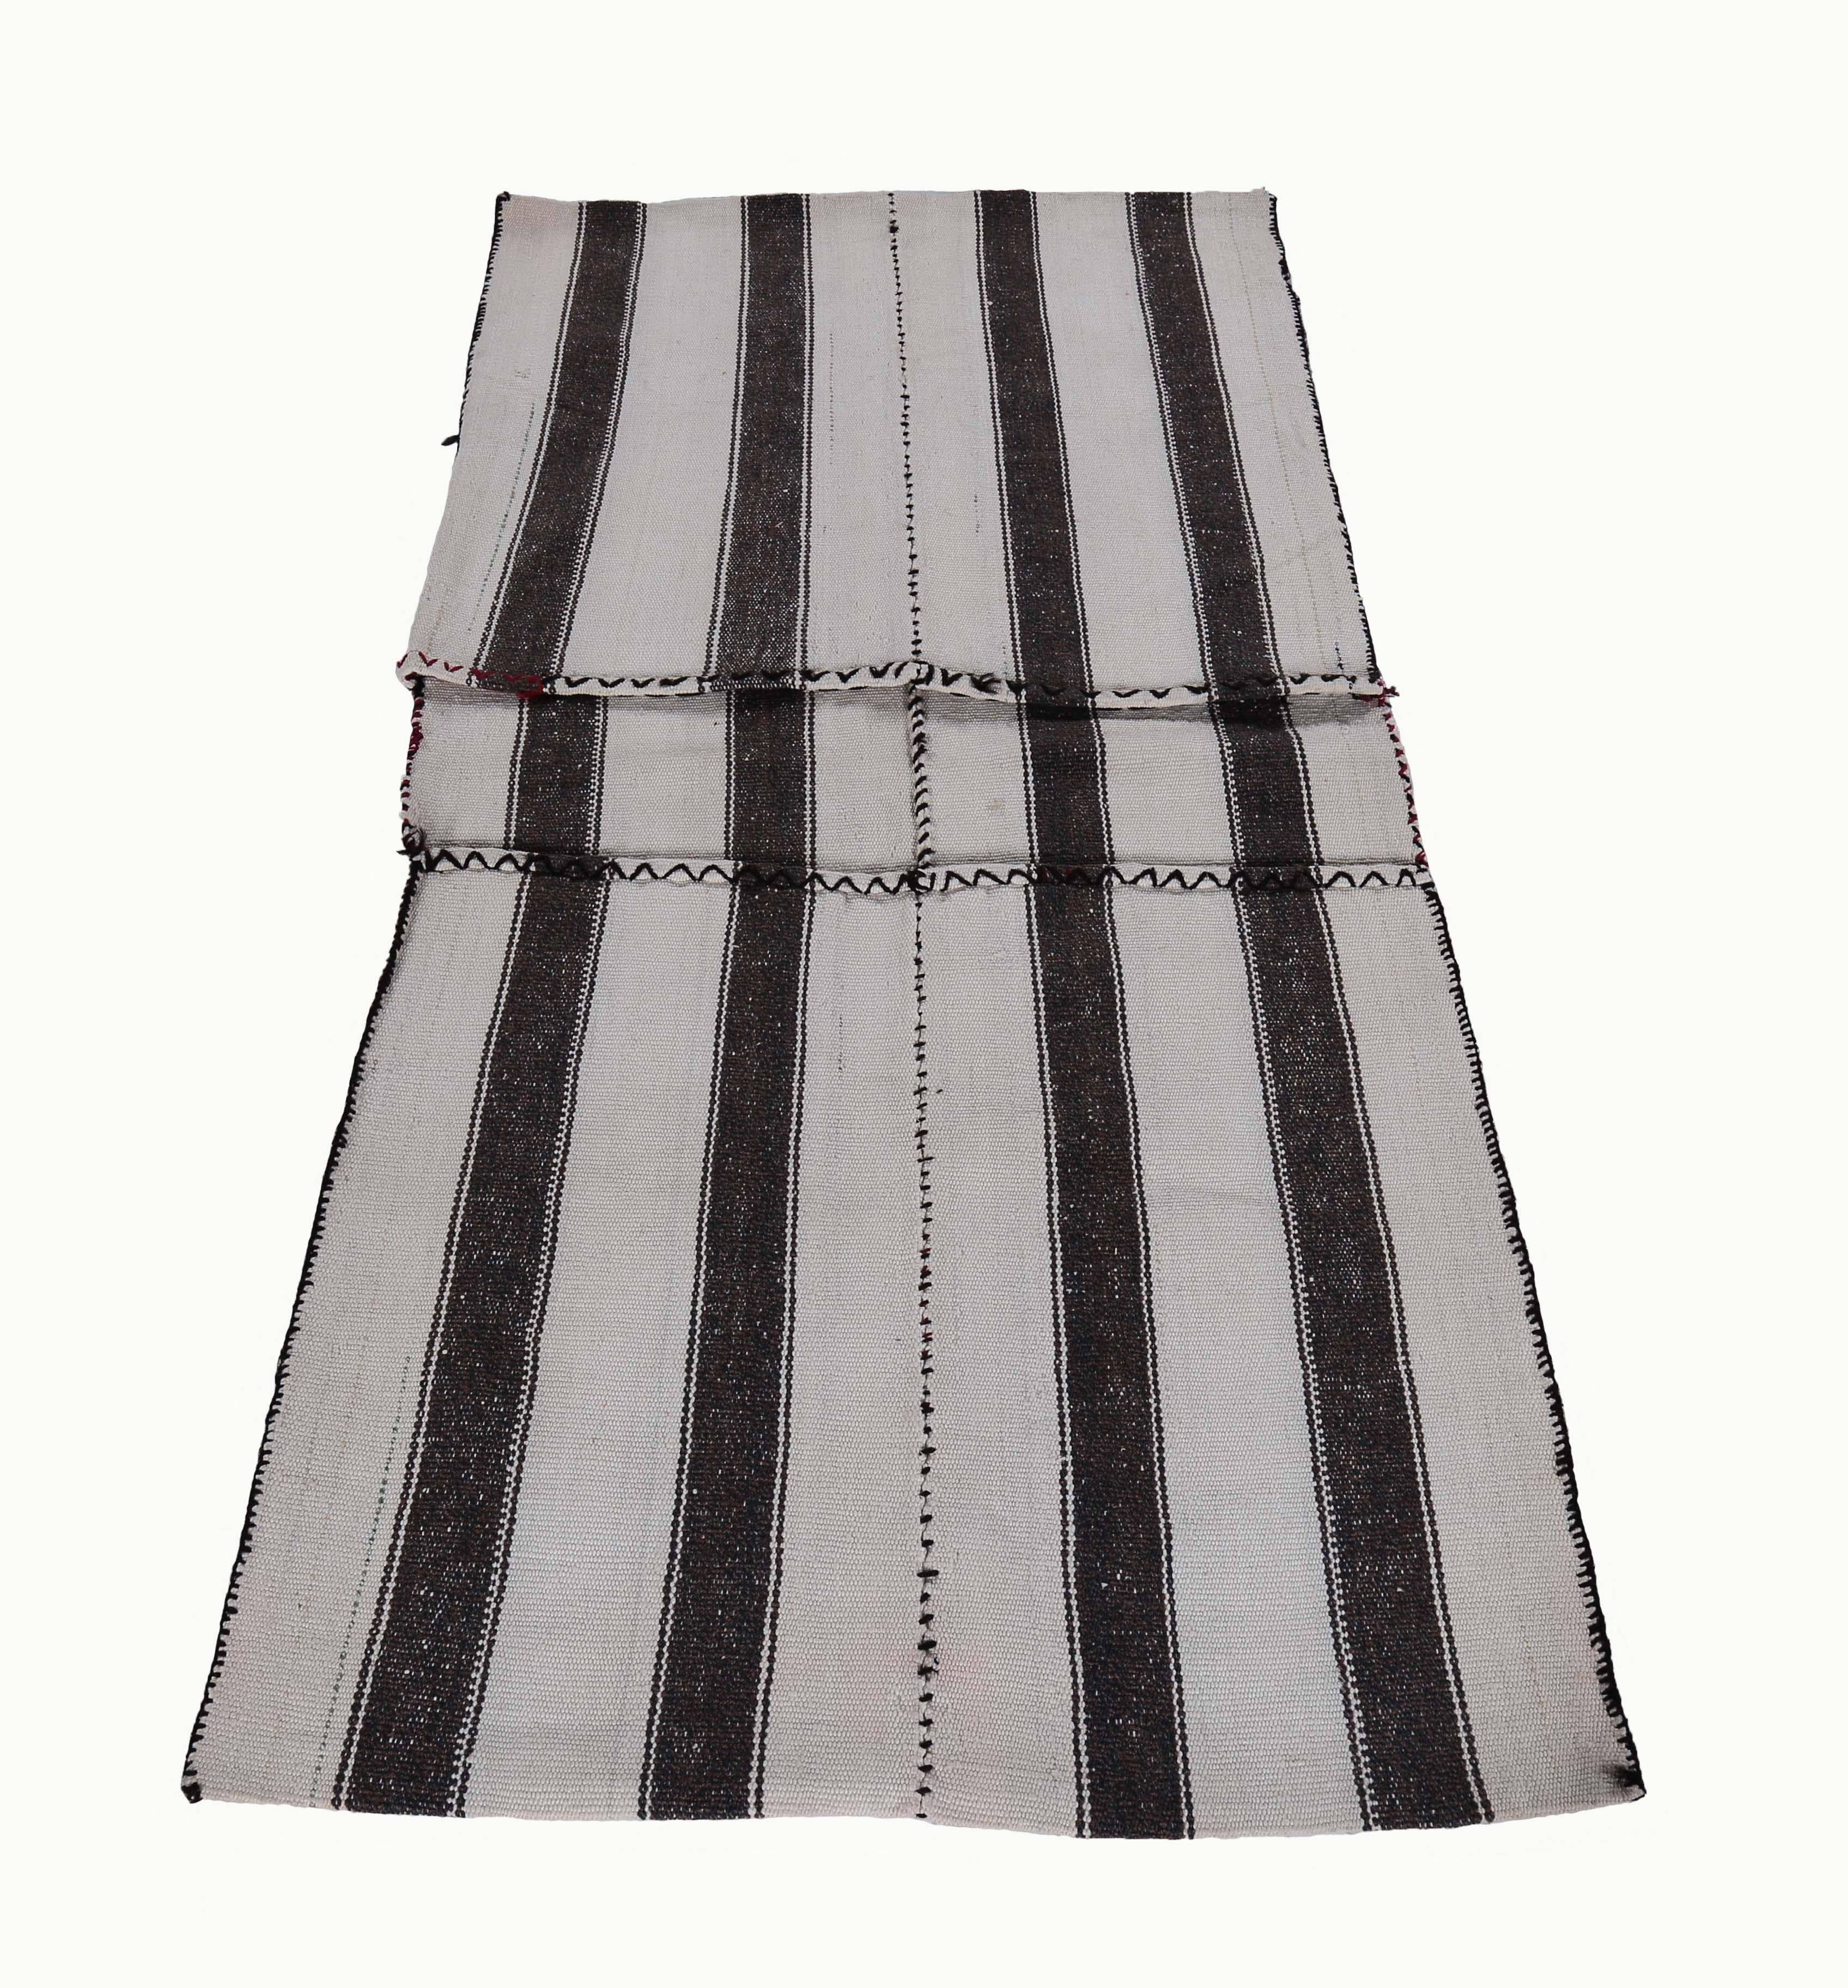 Turkish rug handwoven from the finest sheep’s wool and colored with all-natural vegetable dyes that are safe for humans and pets. It’s a traditional Kilim flat-weave design featuring black stripes in a white field. It’s a stunning piece to get for